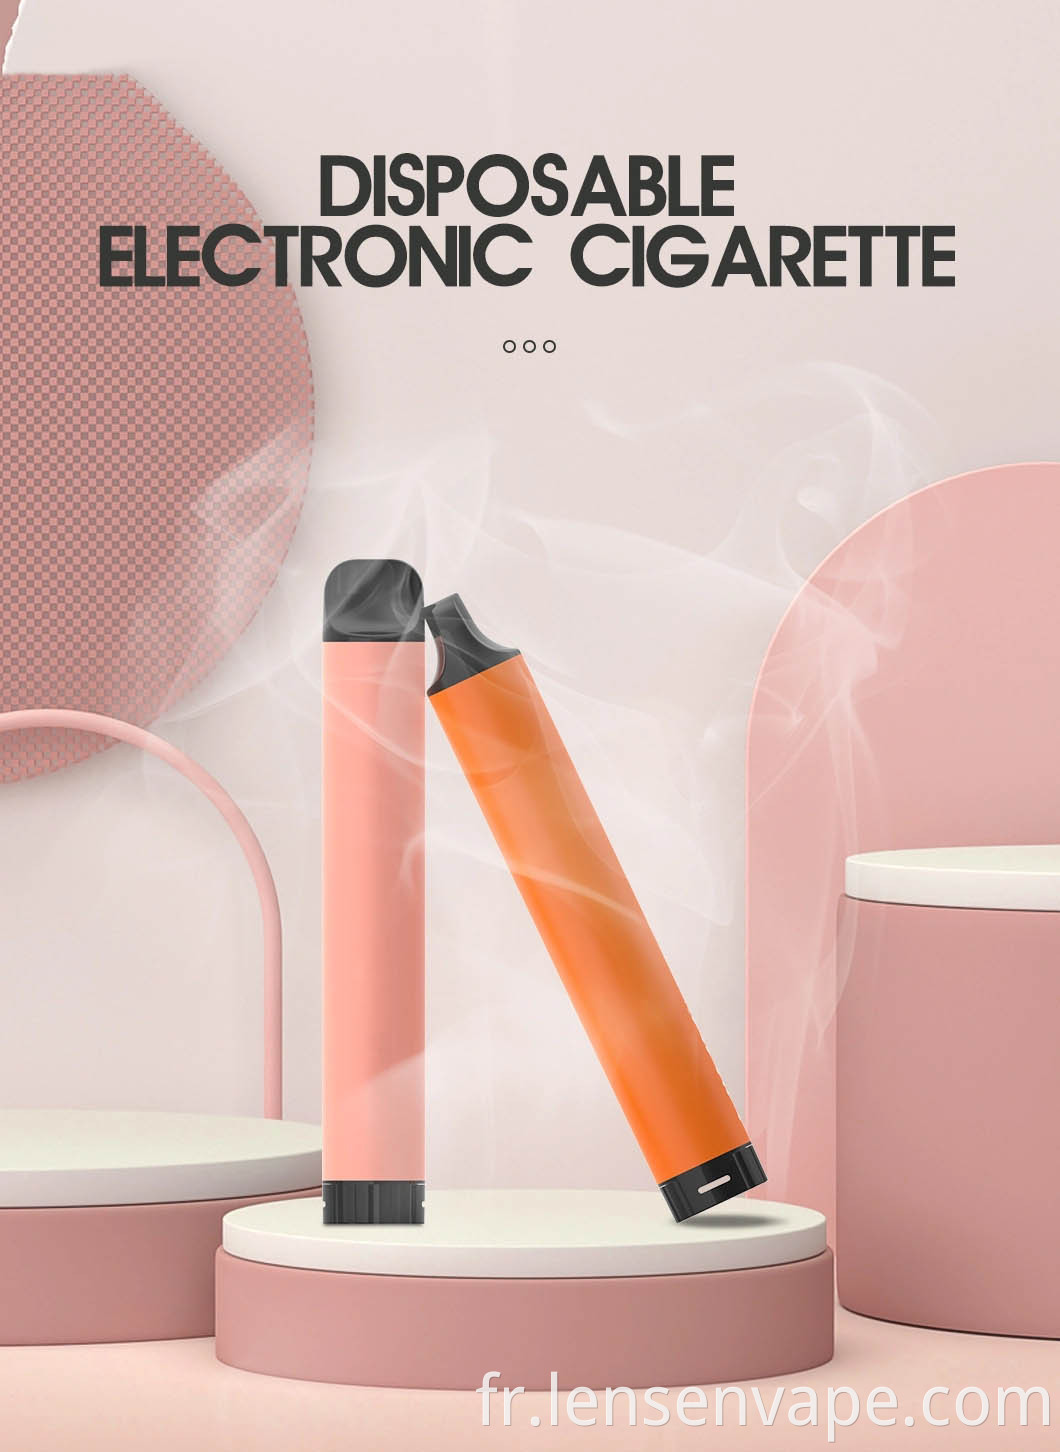 A. New-Listed-Eight-Colors-850mAh-Battery-4-6ml-Liquid-Capacity-Professional-Healthy-Environmental-Protection-Disposable-E-Cigarette.webp